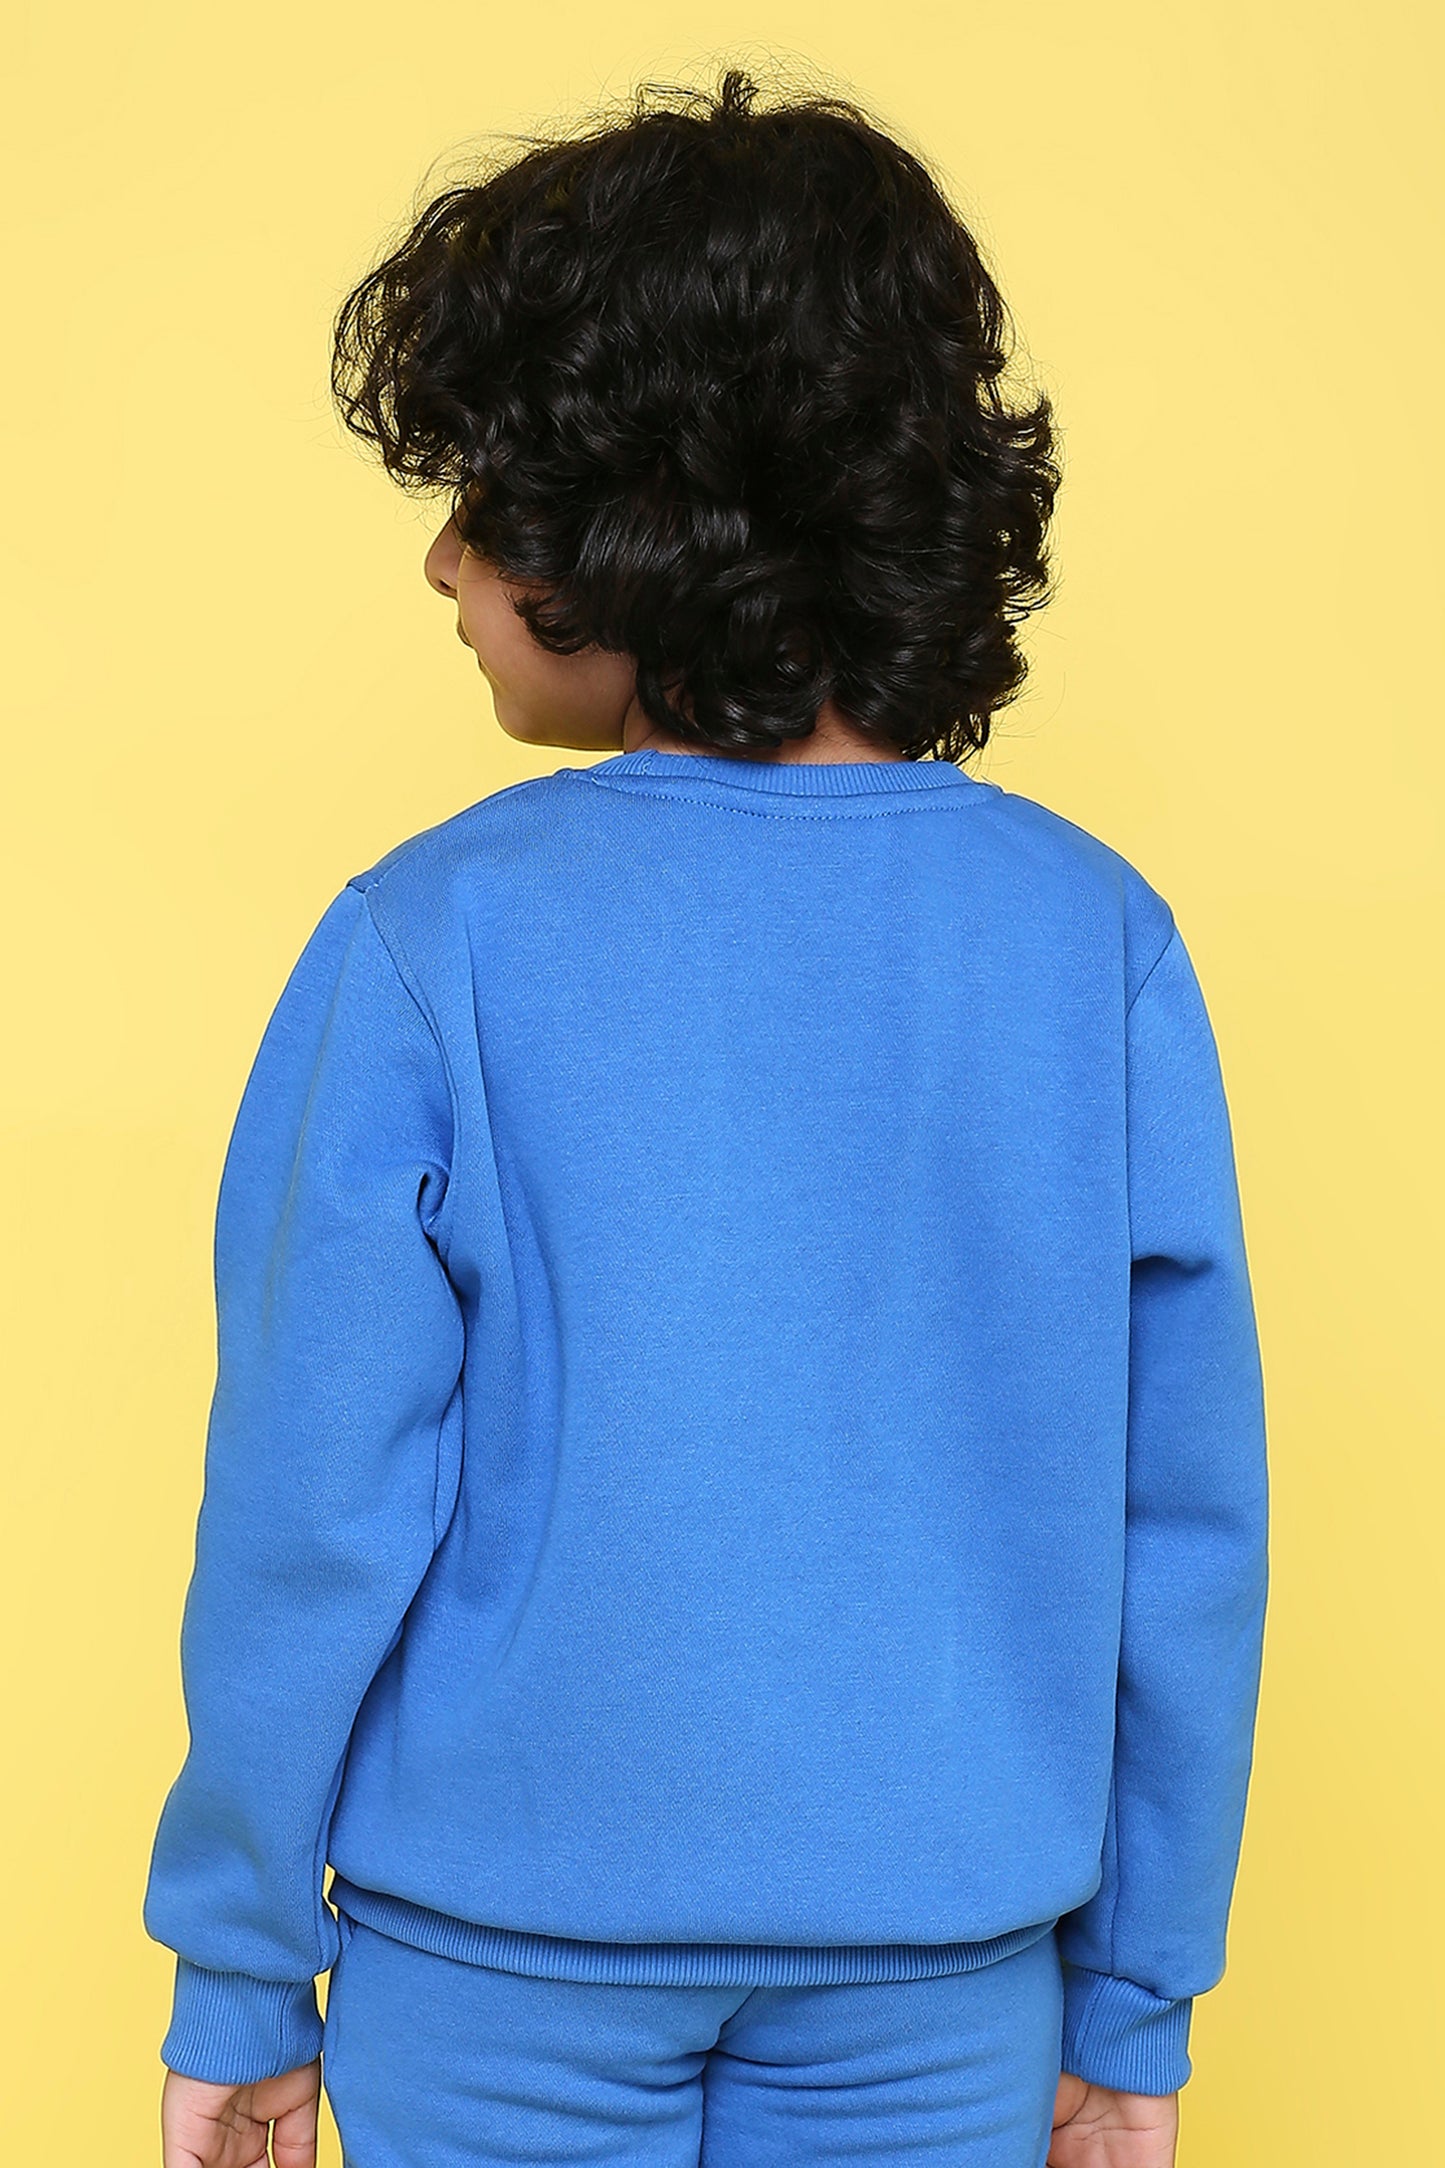 Knitting Doodles Kid's Sweatshirt with Warm Fleece and Pocket in front- Blue